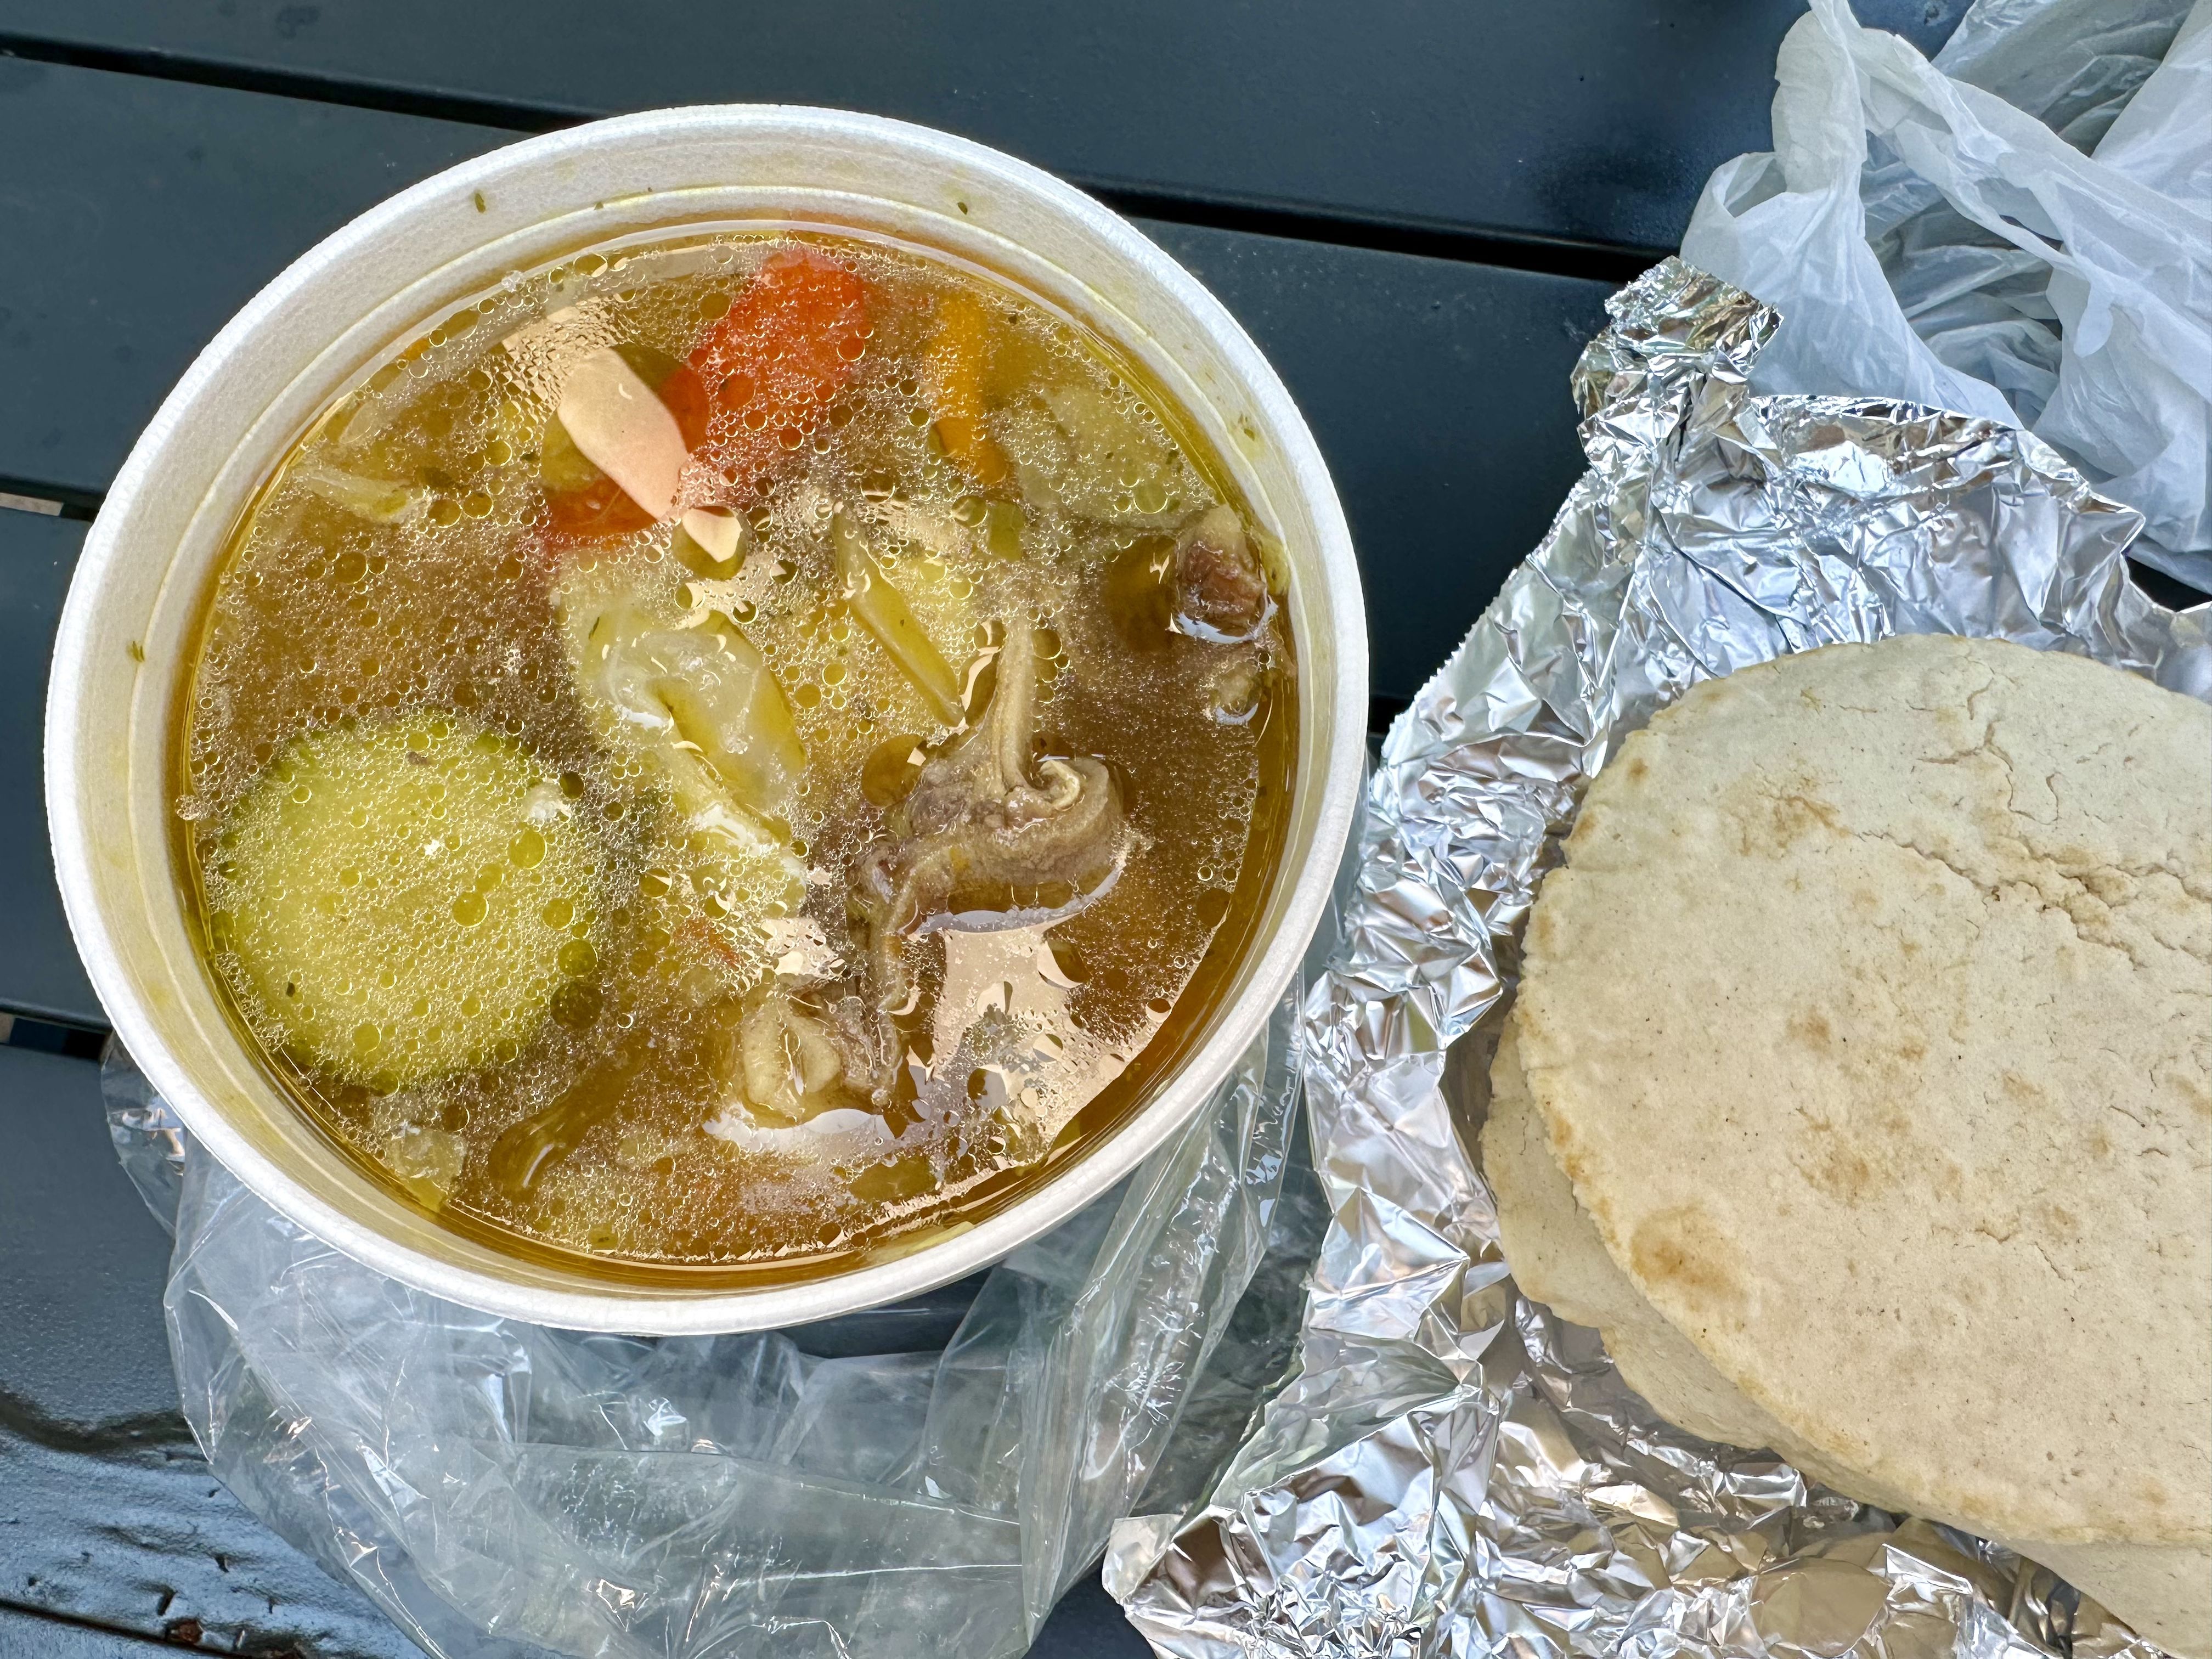 Photo shows a container of sopa de res served with tortillas and rice.